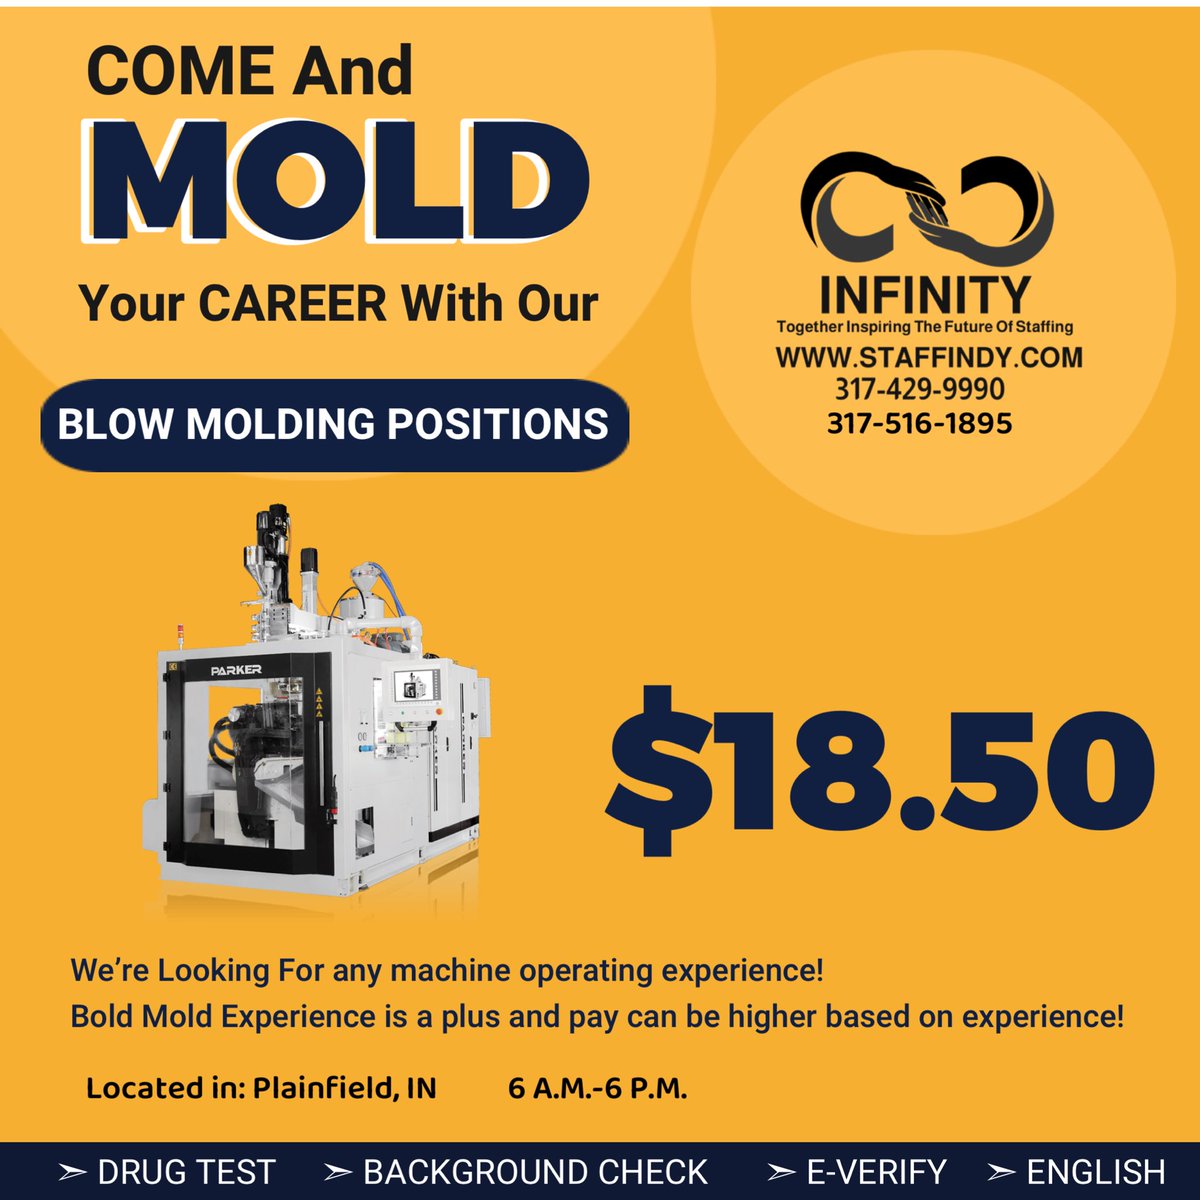 We’re on a search for machine operators looking to expand their machinery skills and the experienced blow mold operators to find a workplace they enjoy:

jobboard.ontempworks.com/InfinityStaffi…

#hiring #findwork #tuesdayvibes #employment #machinery #operators #jobs #plainfieldindiana #applynow